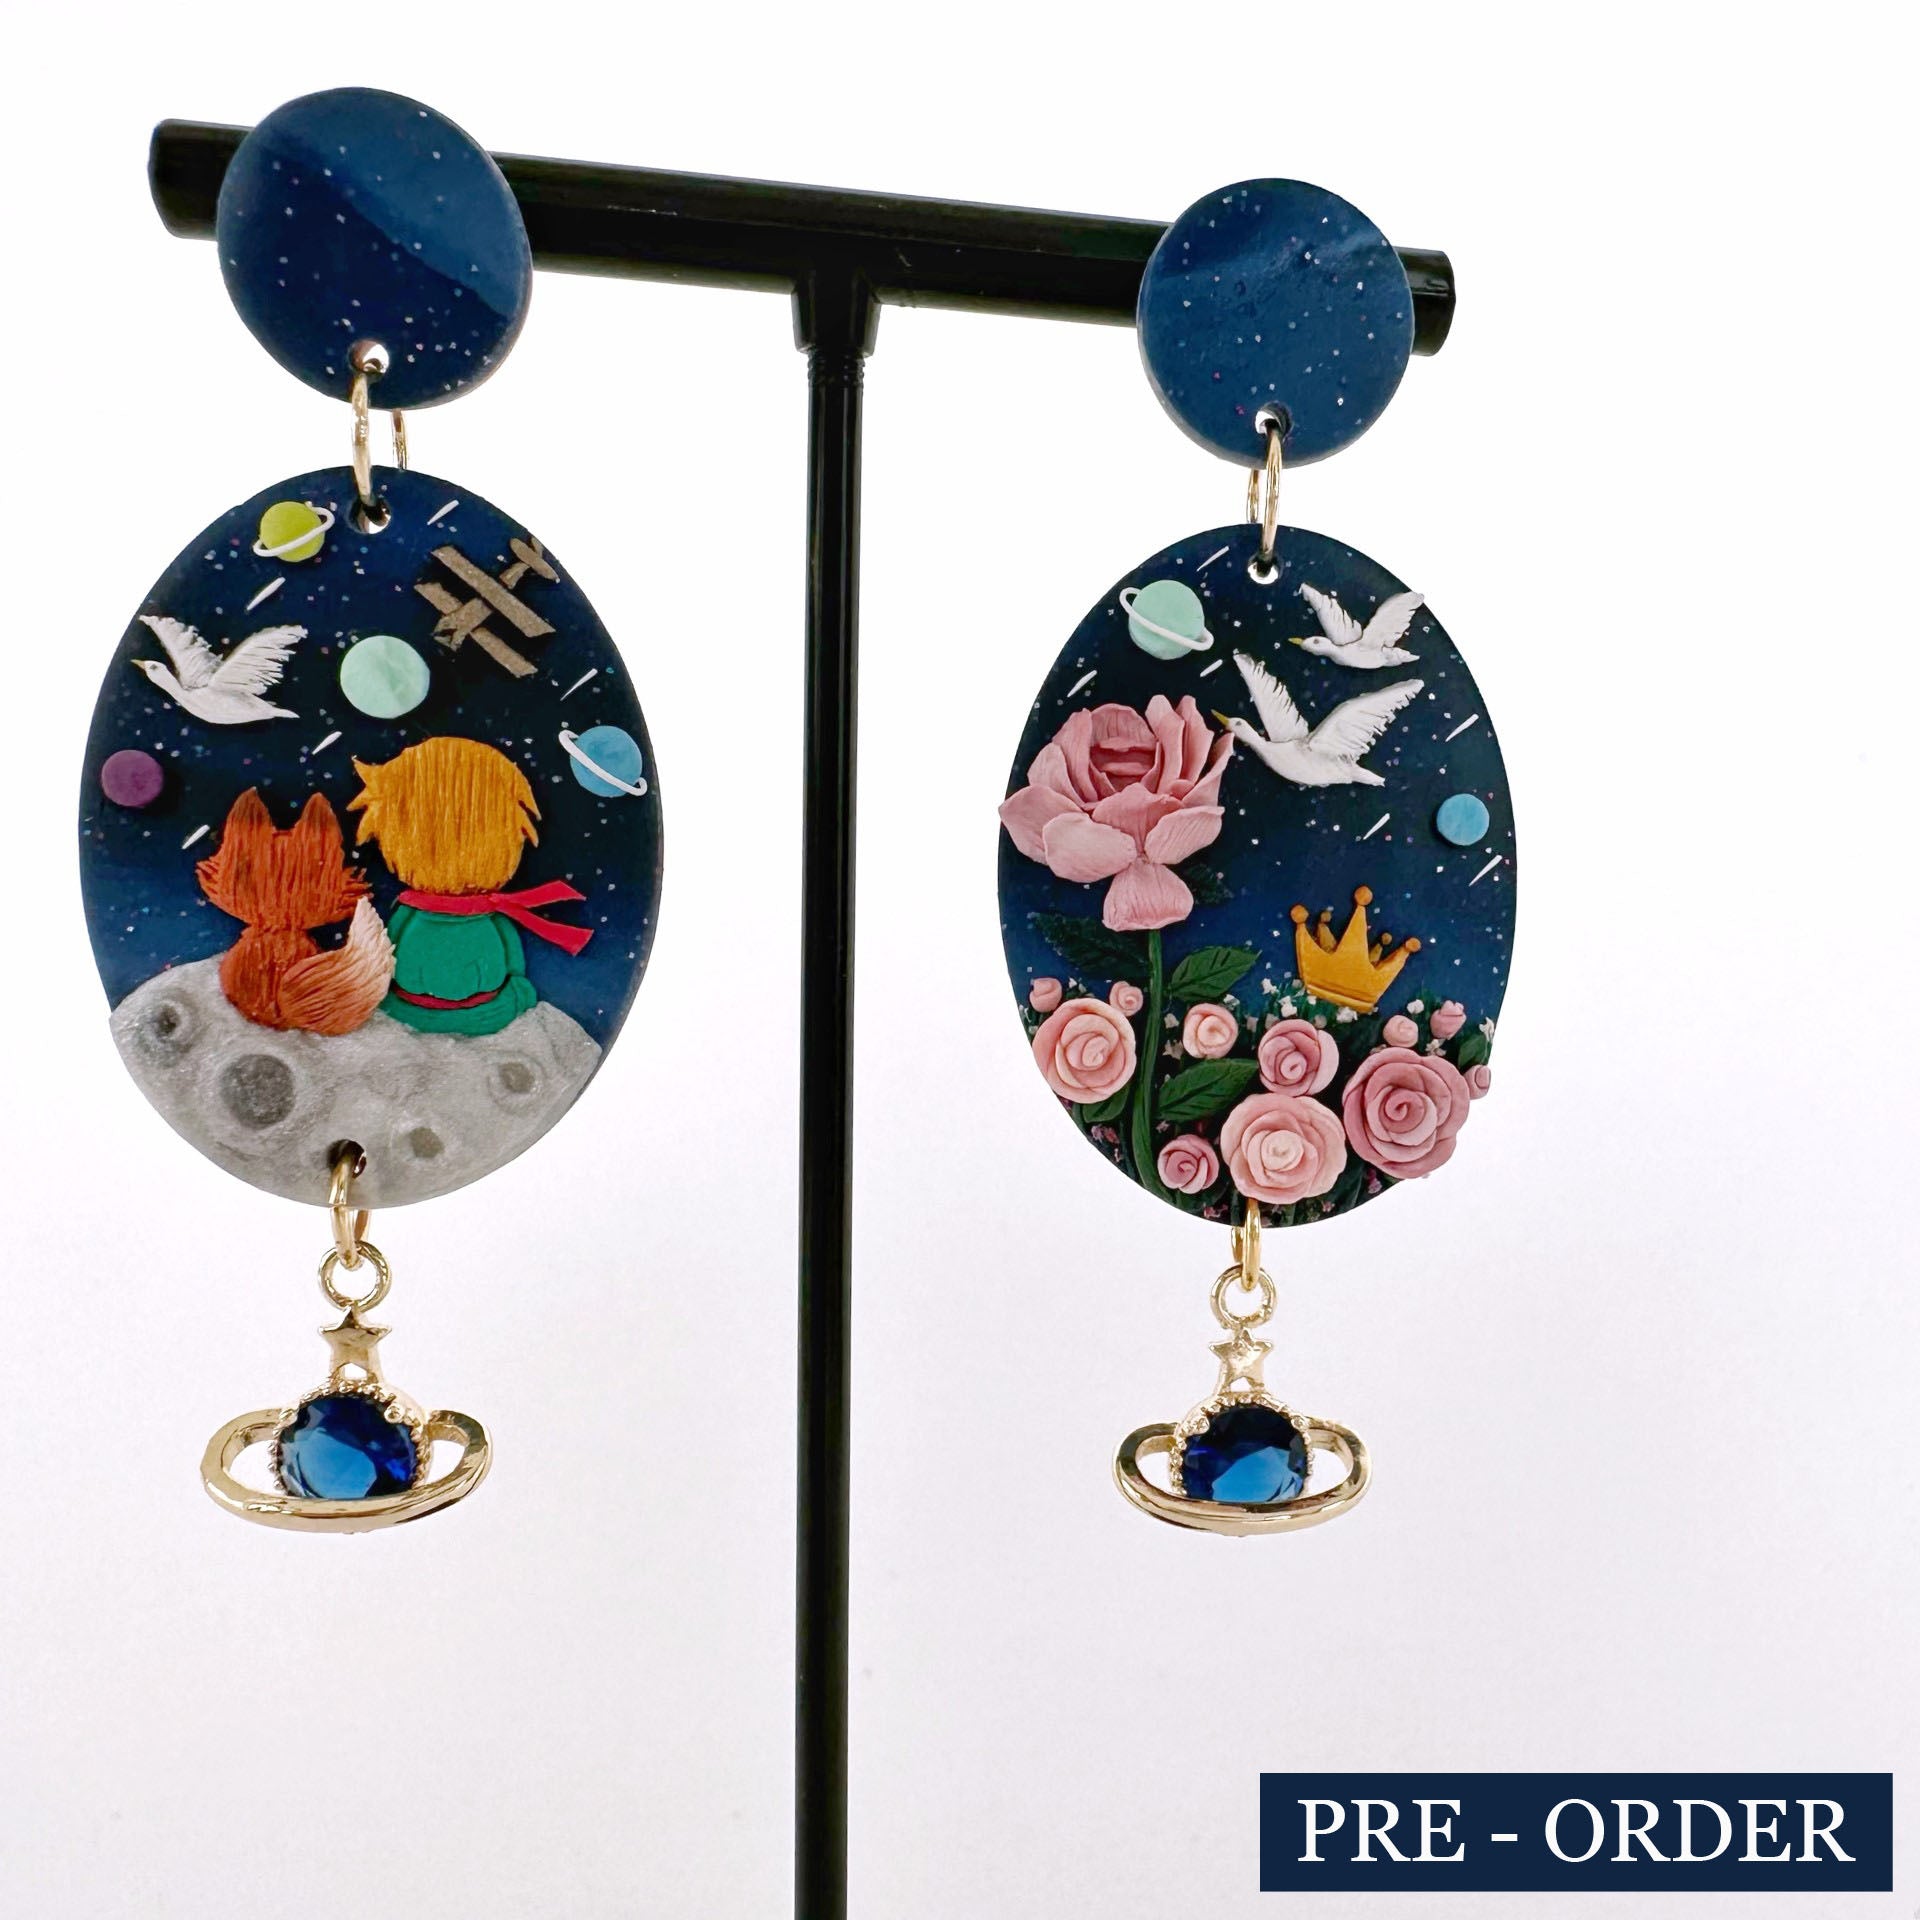 Pre-Order : The Little Prince (Blue)